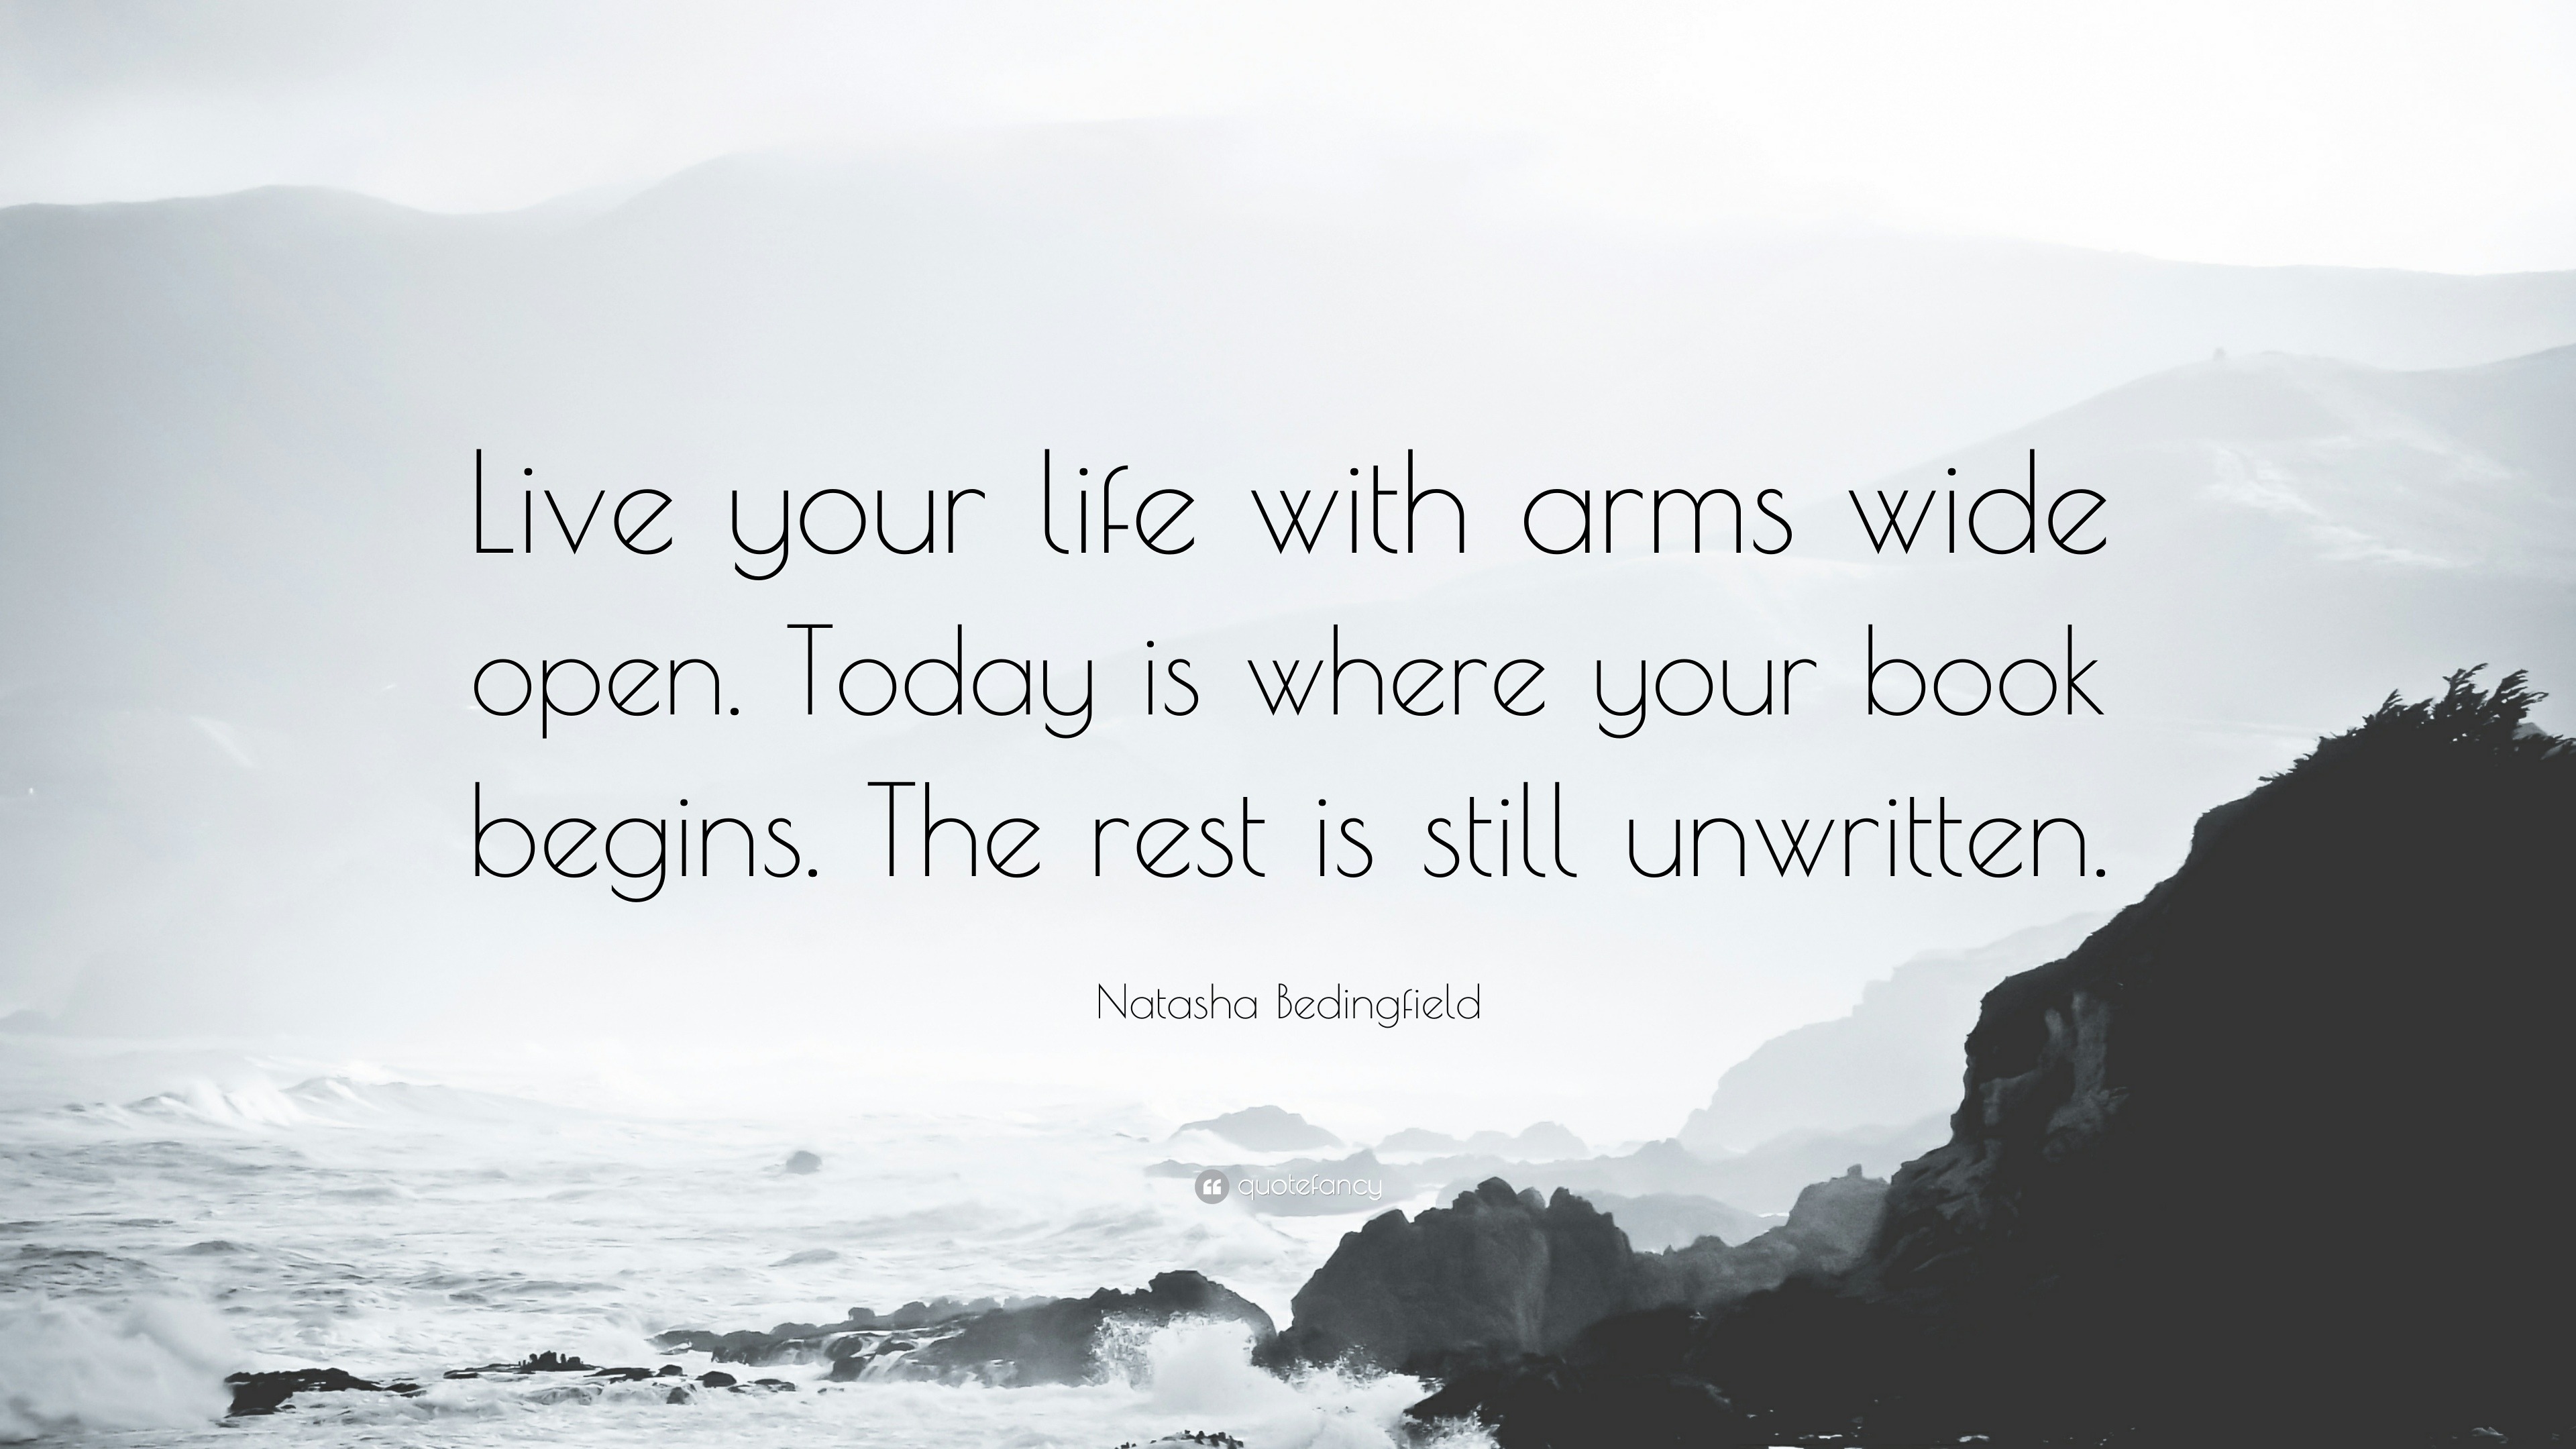 Natasha Bedingfield Quote “Live your life with arms wide open Today is where